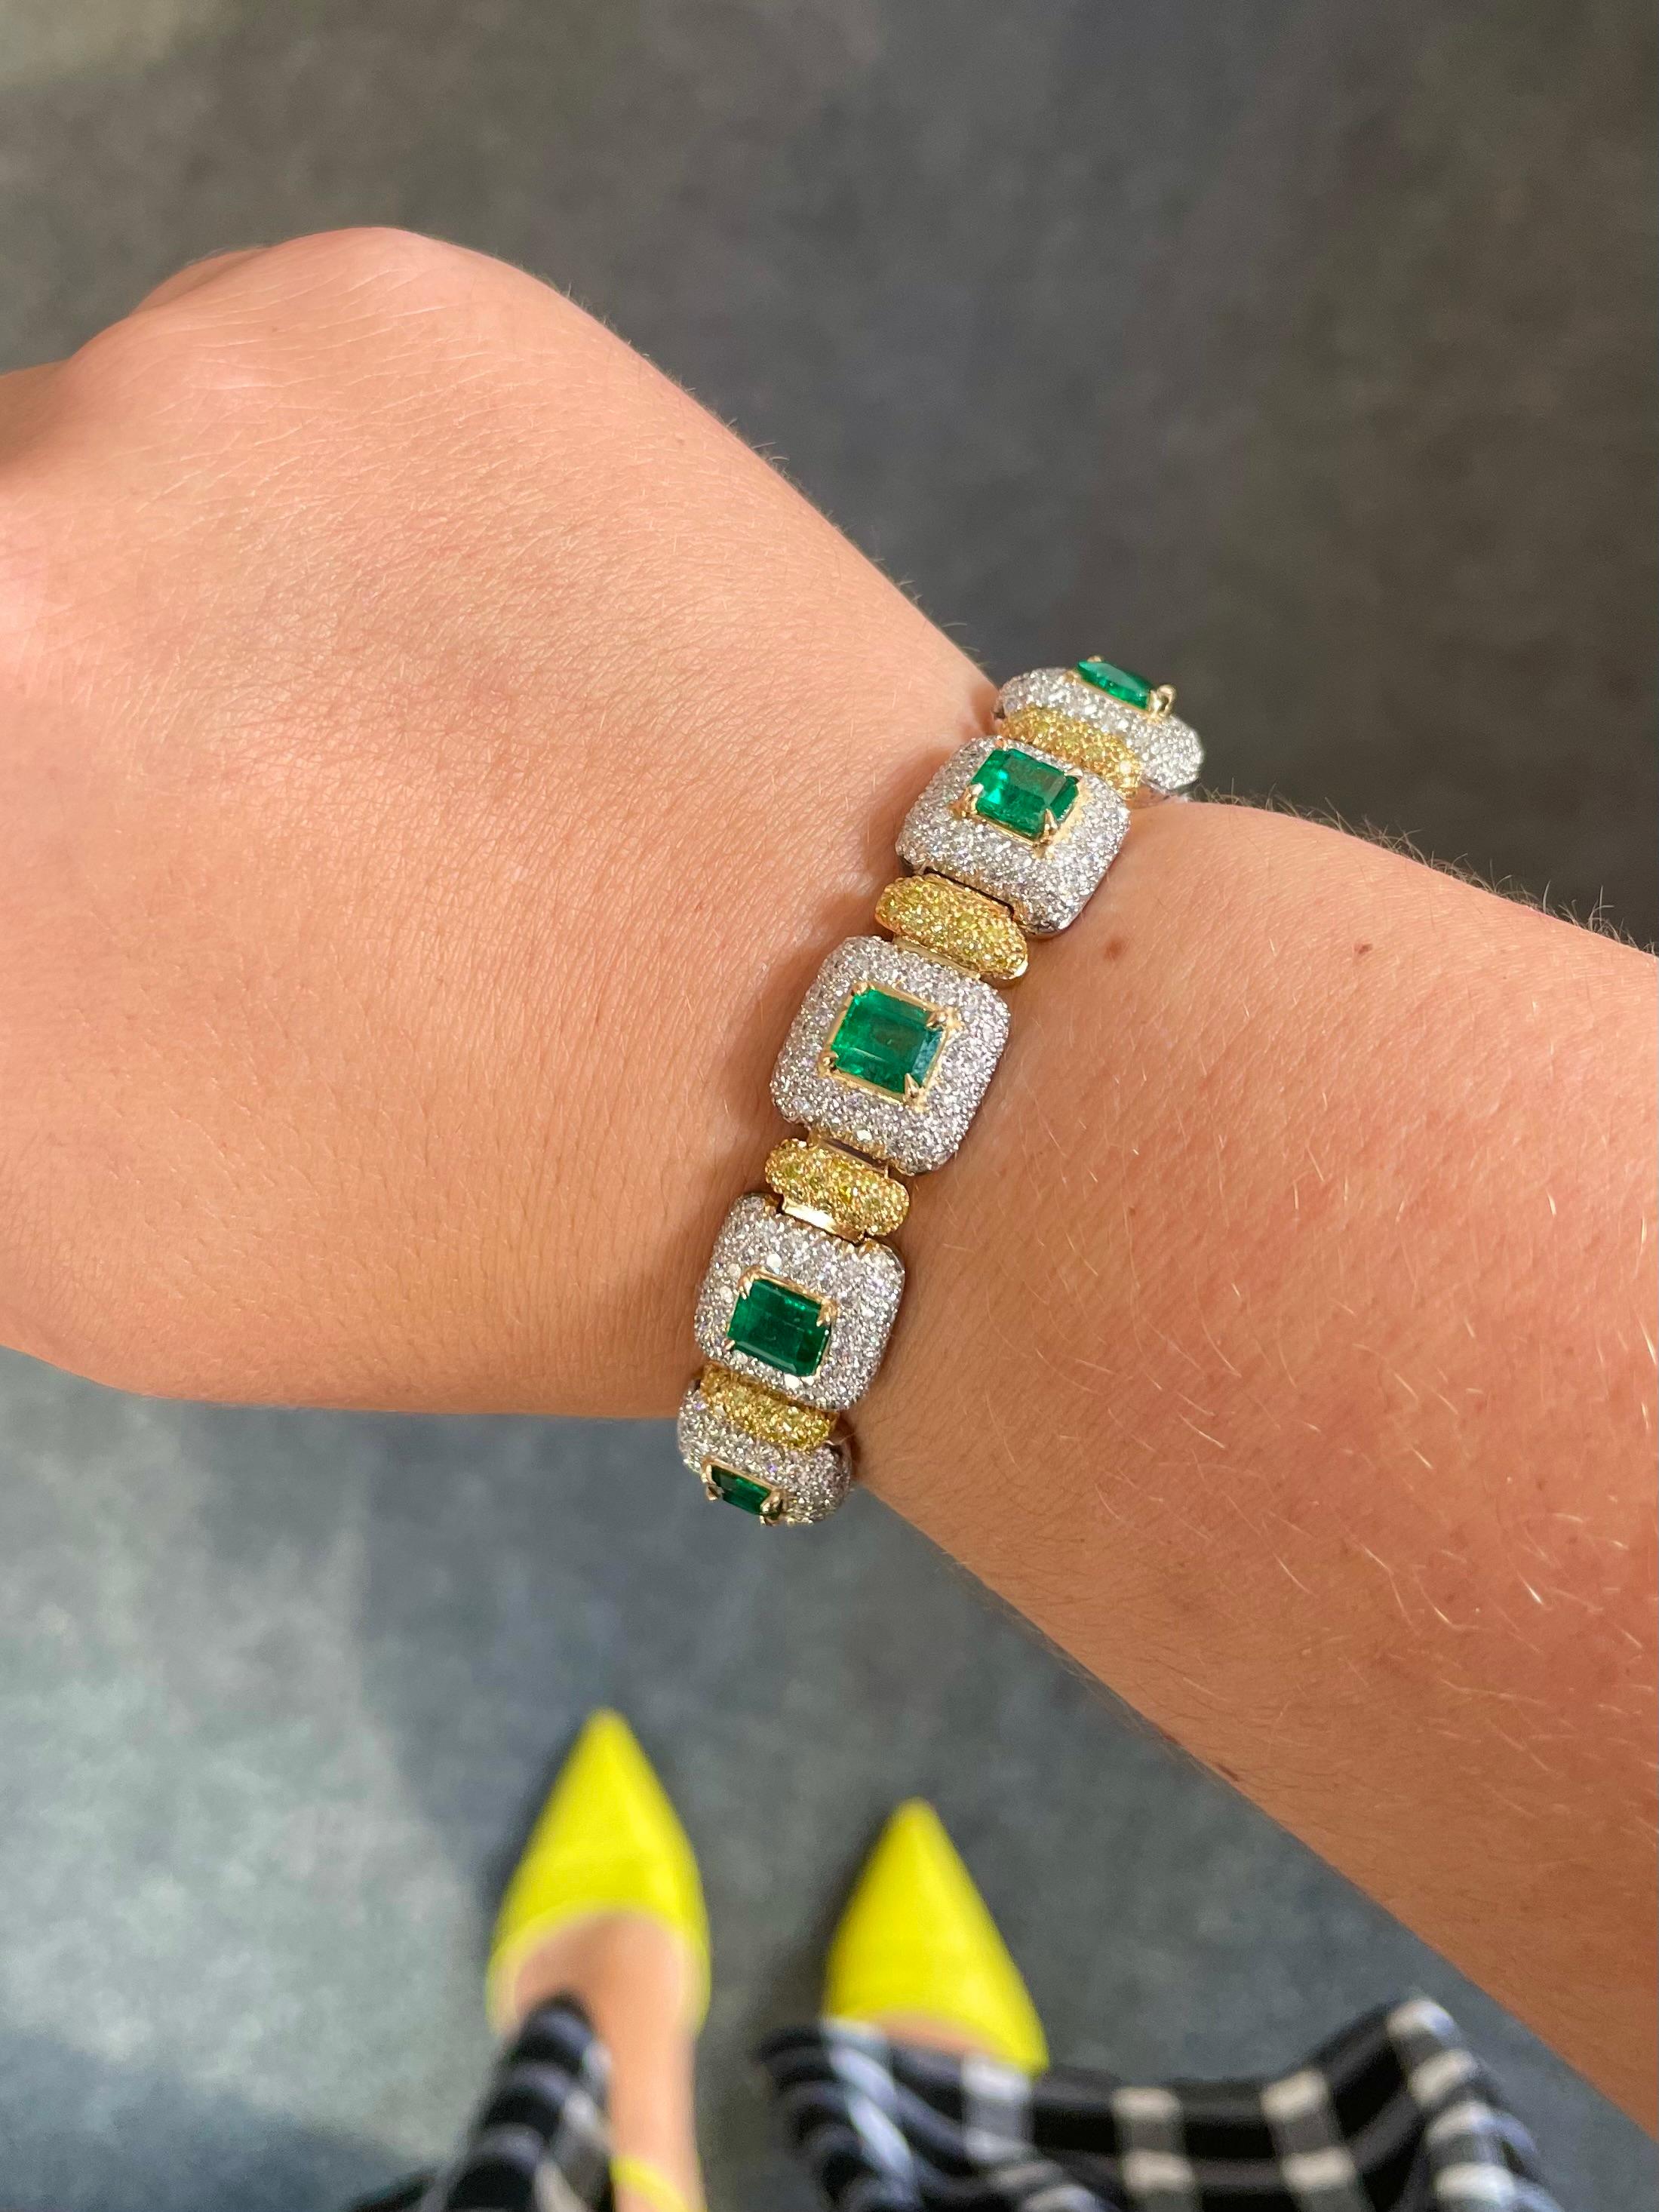 Women's J. Birnbach 9.63 ct Emerald Bracelet with White and Fancy Yellow Pave Diamonds  For Sale